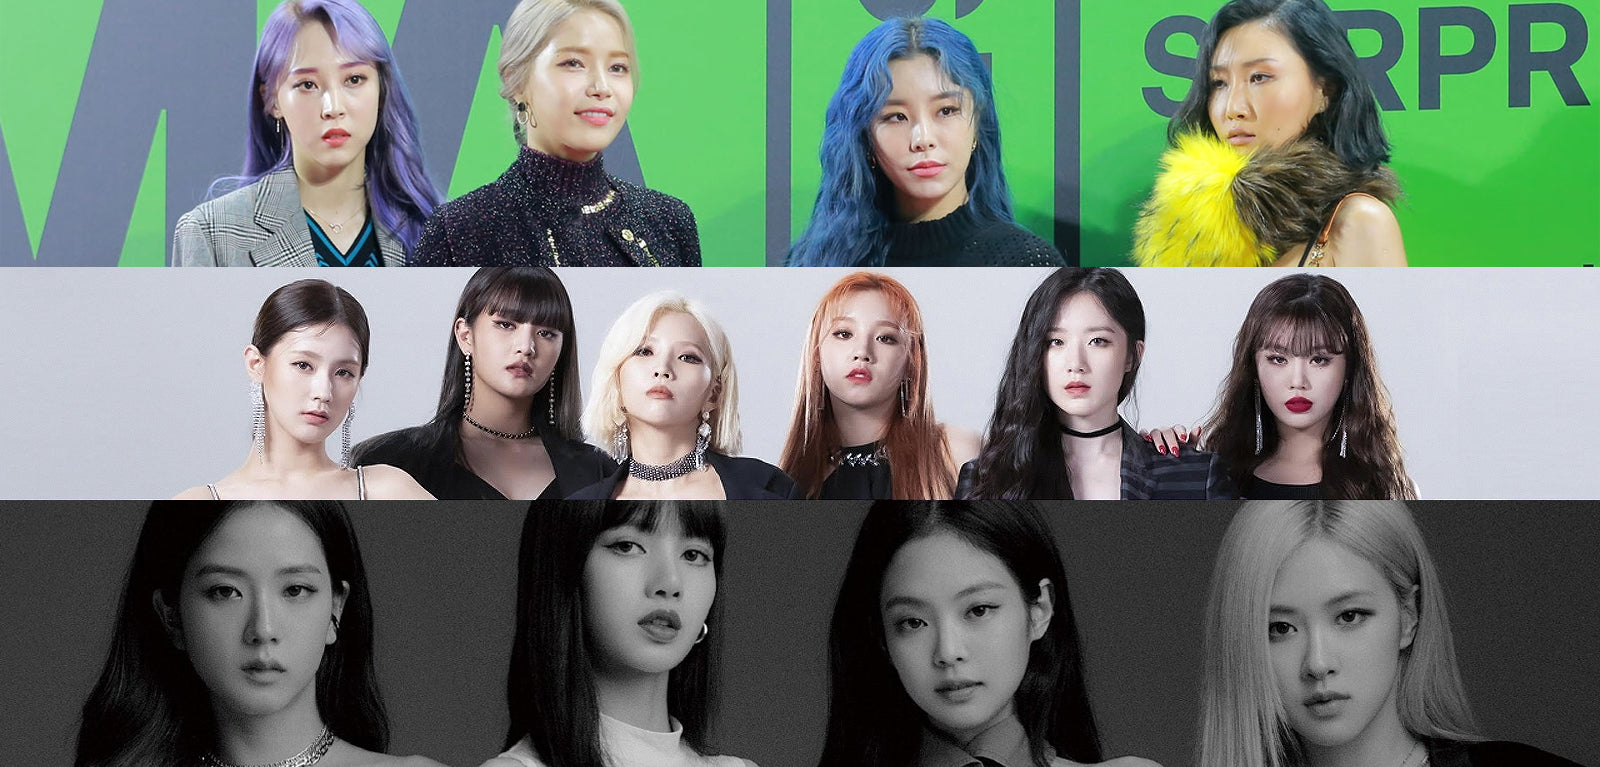 Discover the classification by reputation of the female groups of December 2019 - Kpopshop